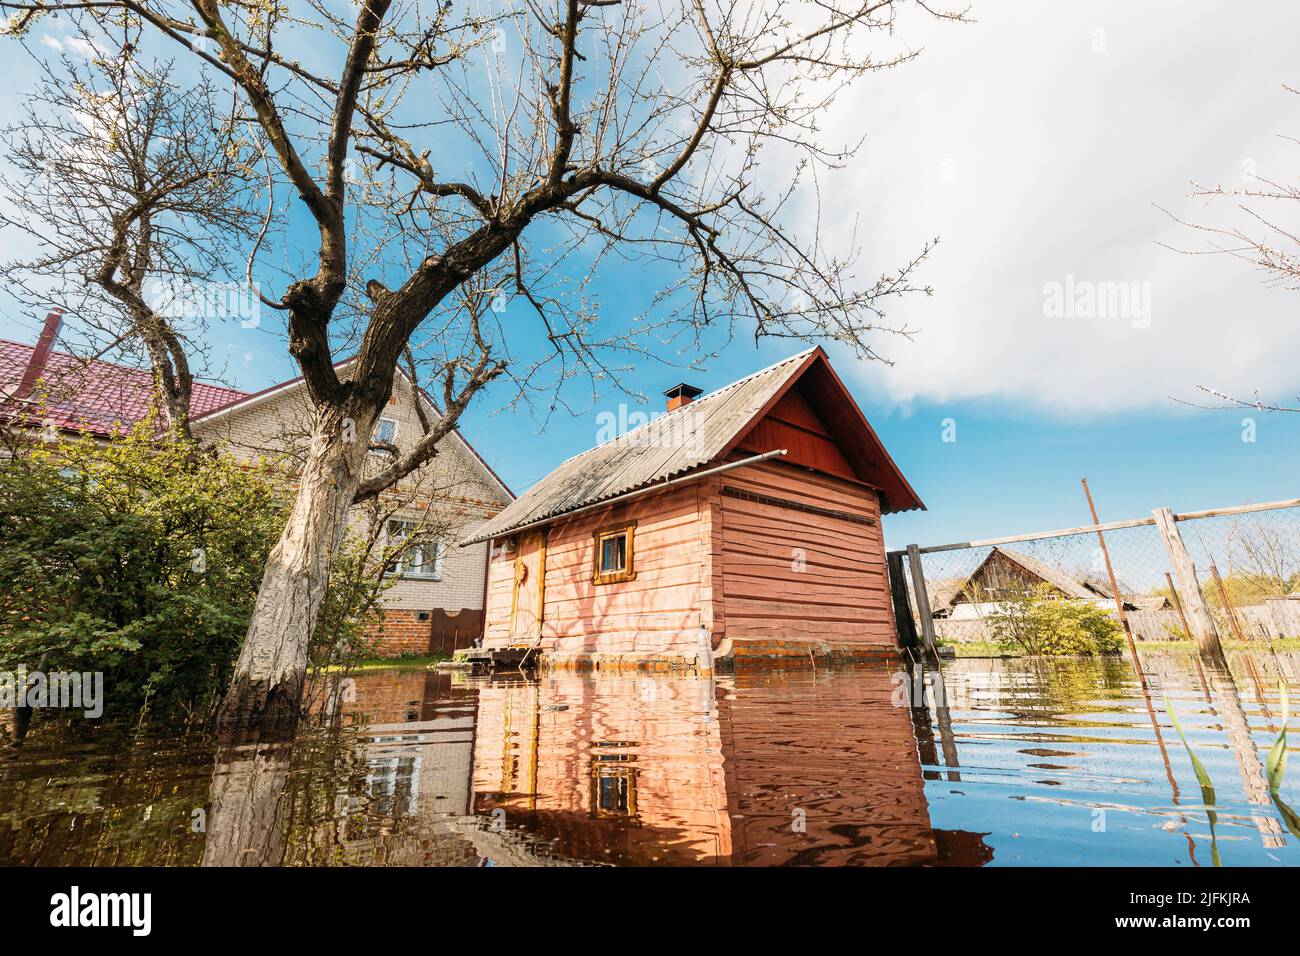 Sauna bath building In Water During Spring Flood floodwaters during natural disaster. Water deluge During A Spring Flood. inundation River. Stock Photo